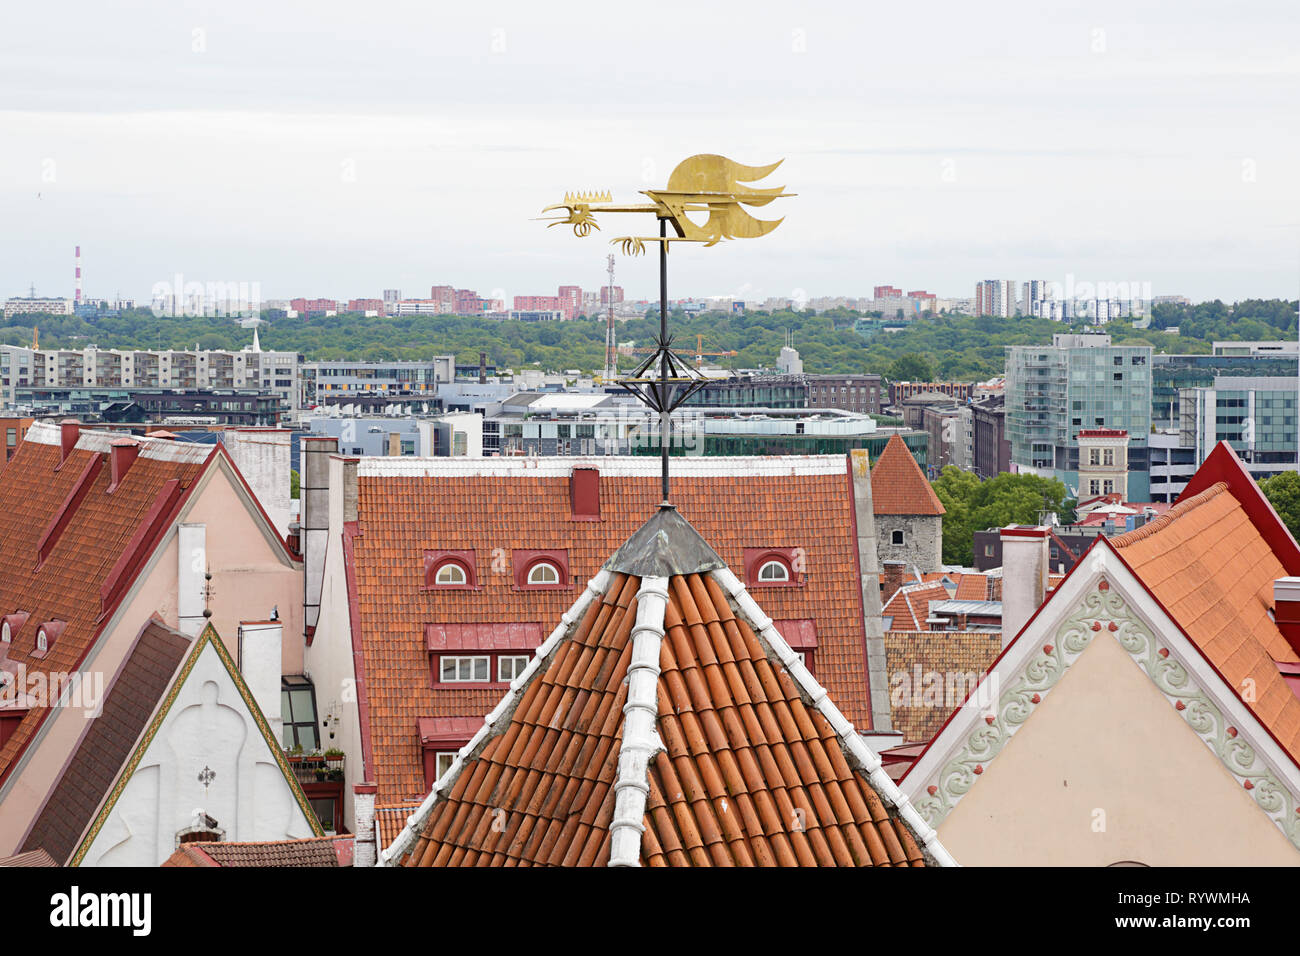 Metal weather vane in the shape of a rooster over the city. Tallinn, Estonia Stock Photo